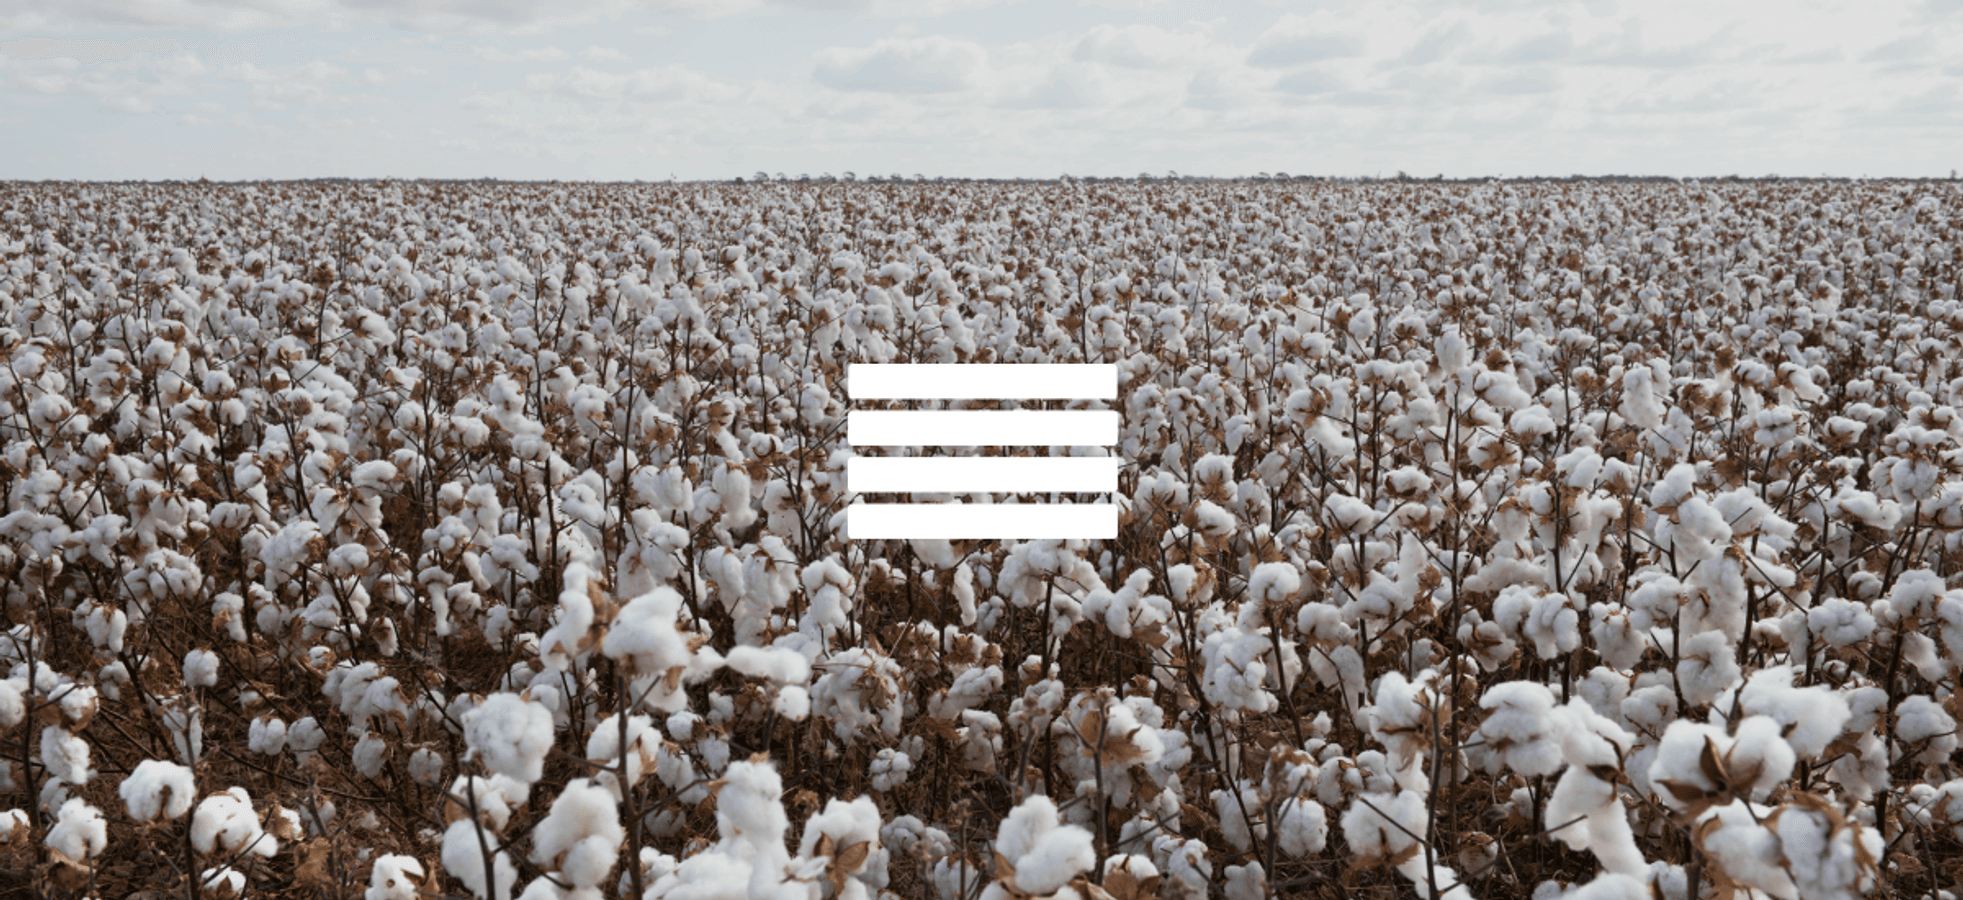 Biodiversity: What are the benefits of recycled cotton?